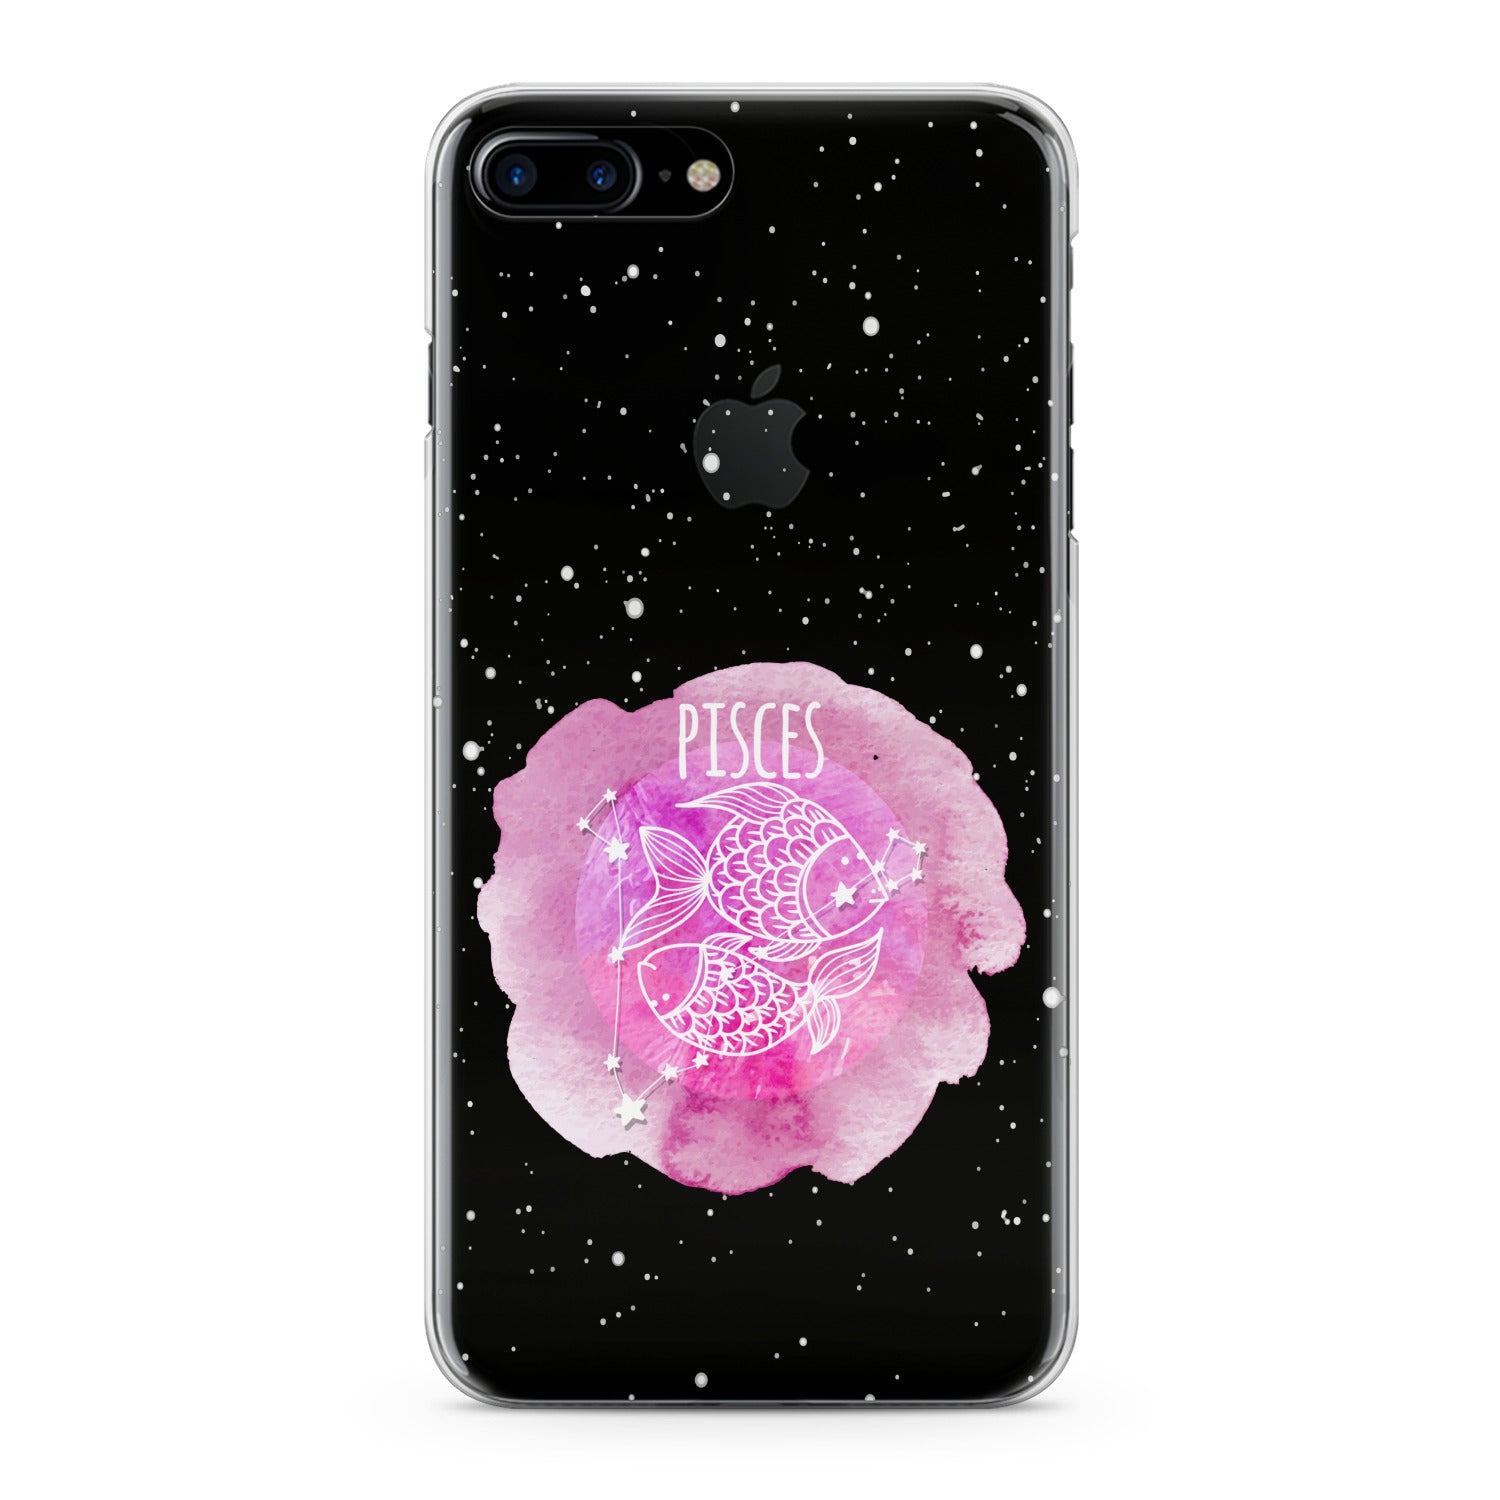 Lex Altern Pisces Zodiac Phone Case for your iPhone & Android phone.